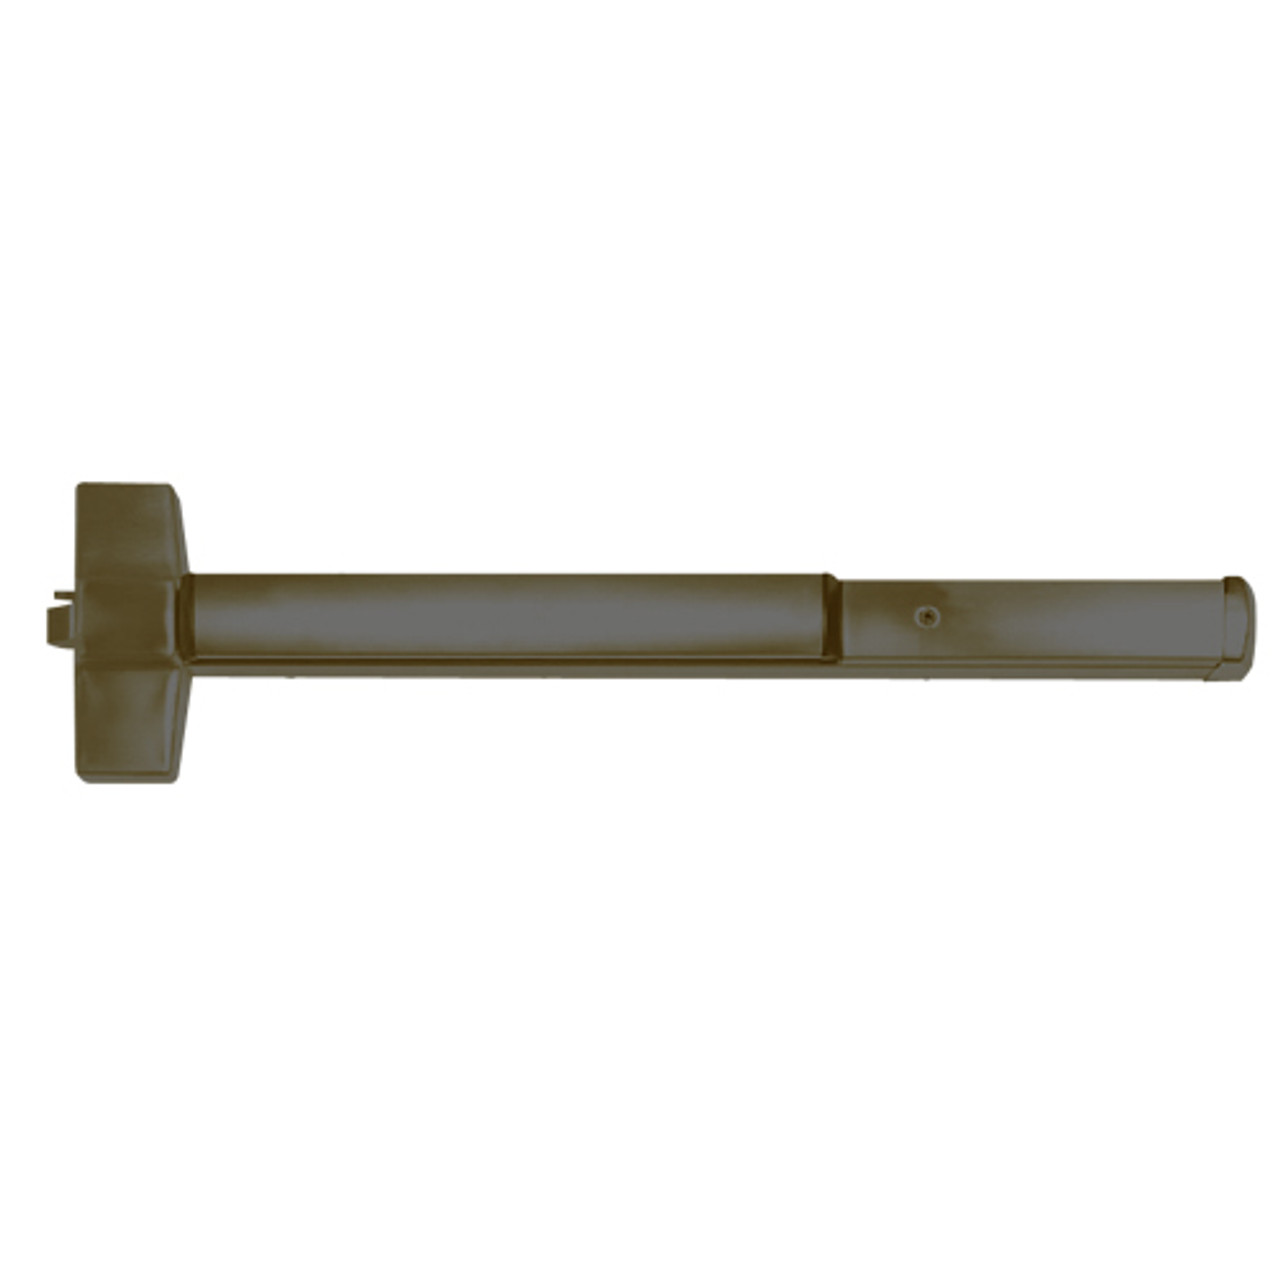 ED5200-613-W048-M52 Corbin ED5200 Series Non Fire Rated Exit Device with Cylinder Dogging in Oil Rubbed Bronze Finish